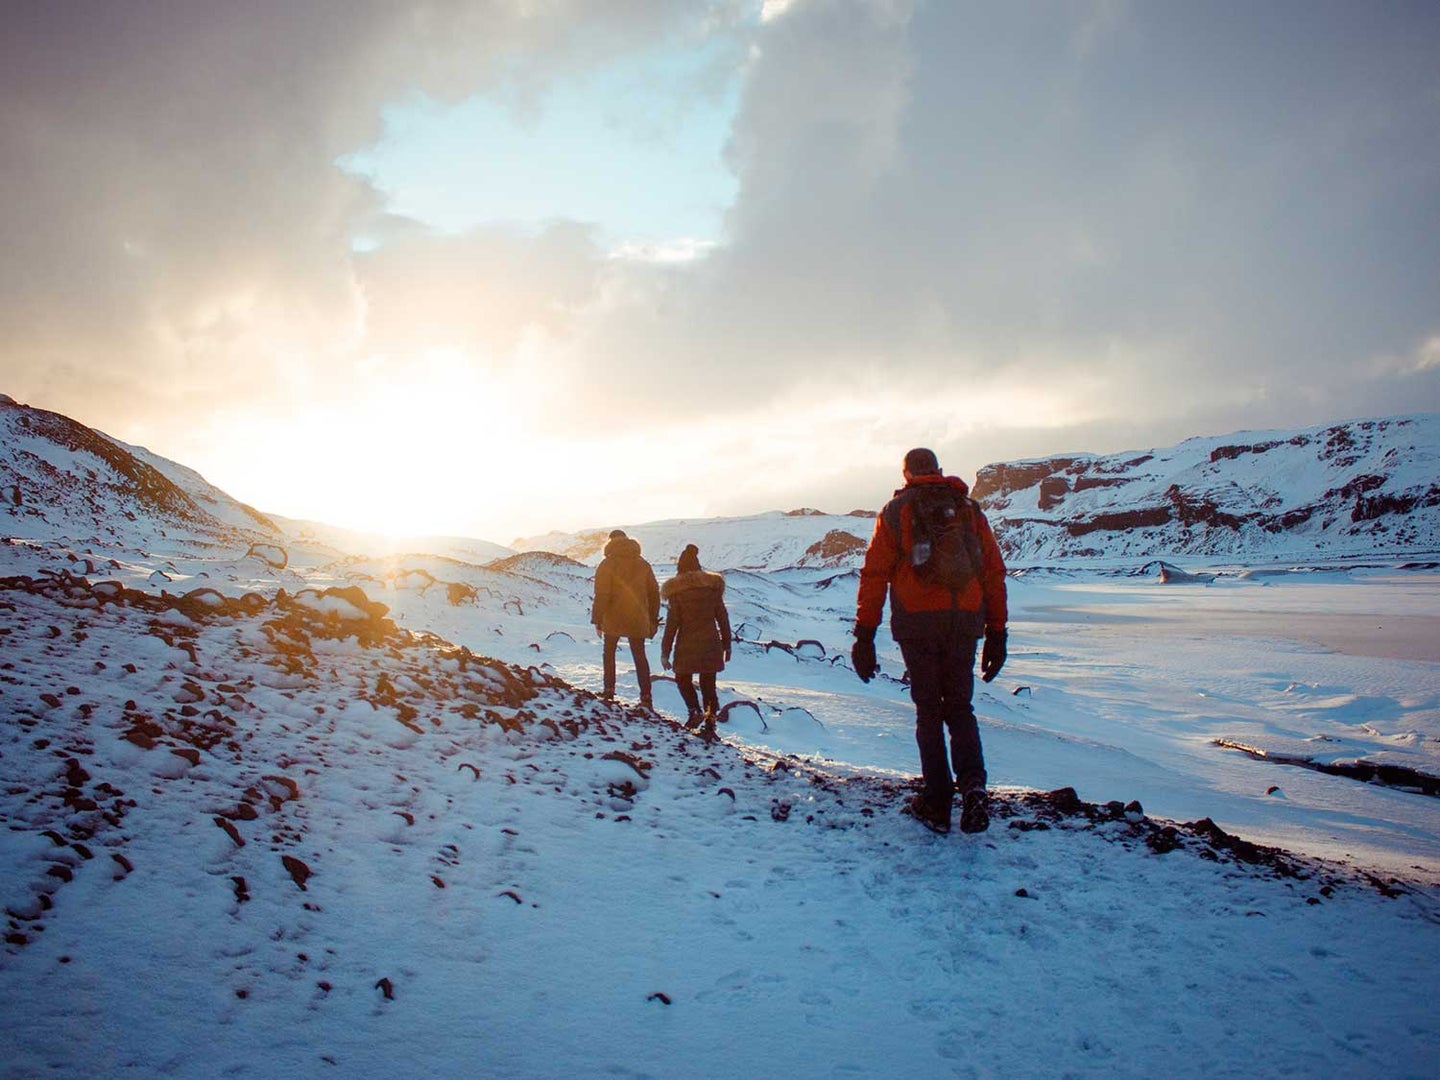 People hiking through snowy mountains.